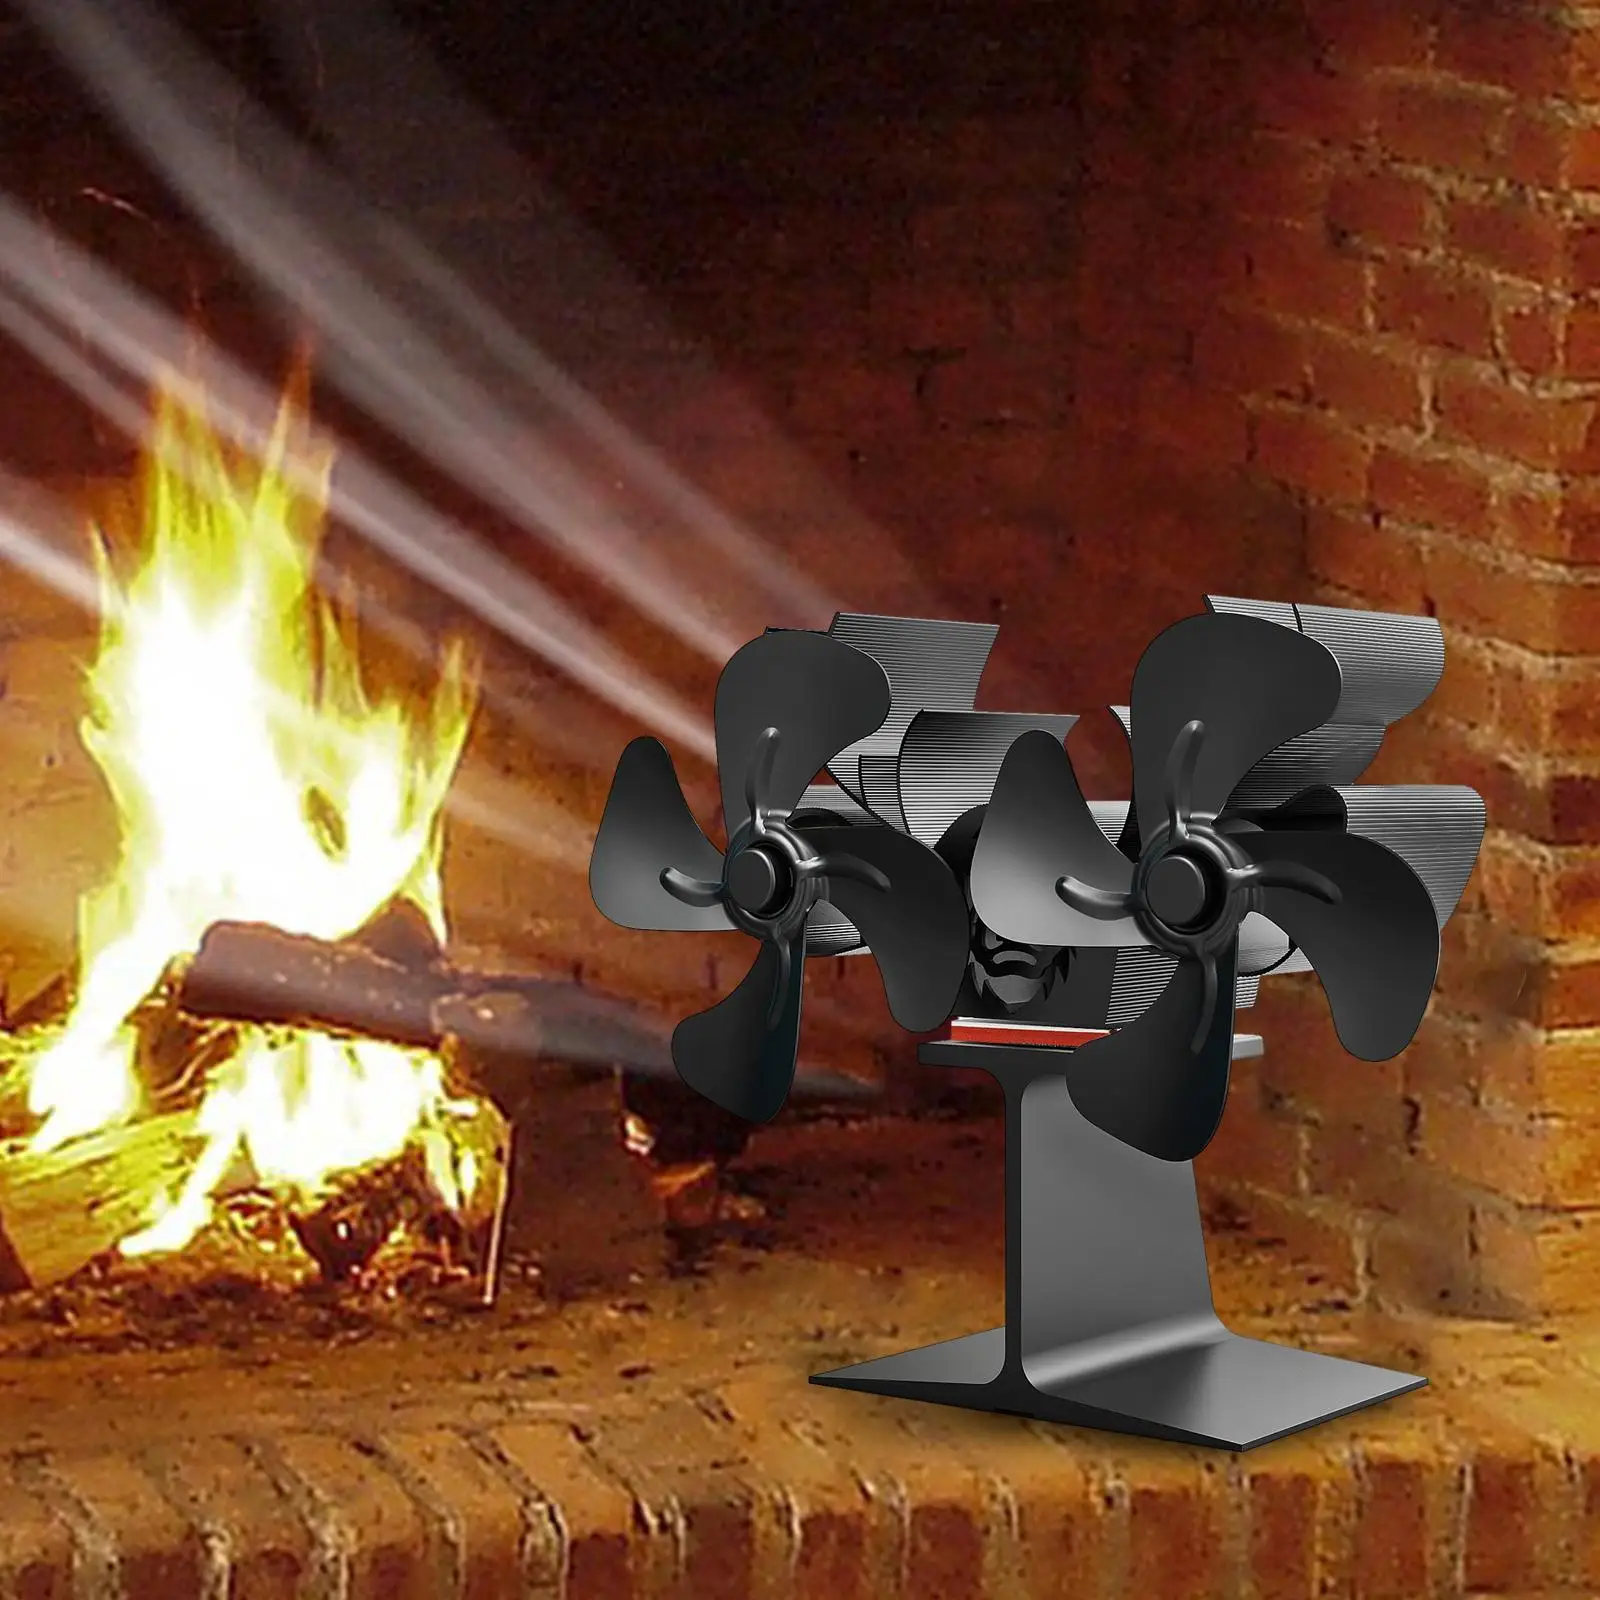 Heat Powered Fireplace Fan with Double Motors Aluminum Professional Low Noise Working Temperature 50-350°C/122-662°F Efficient